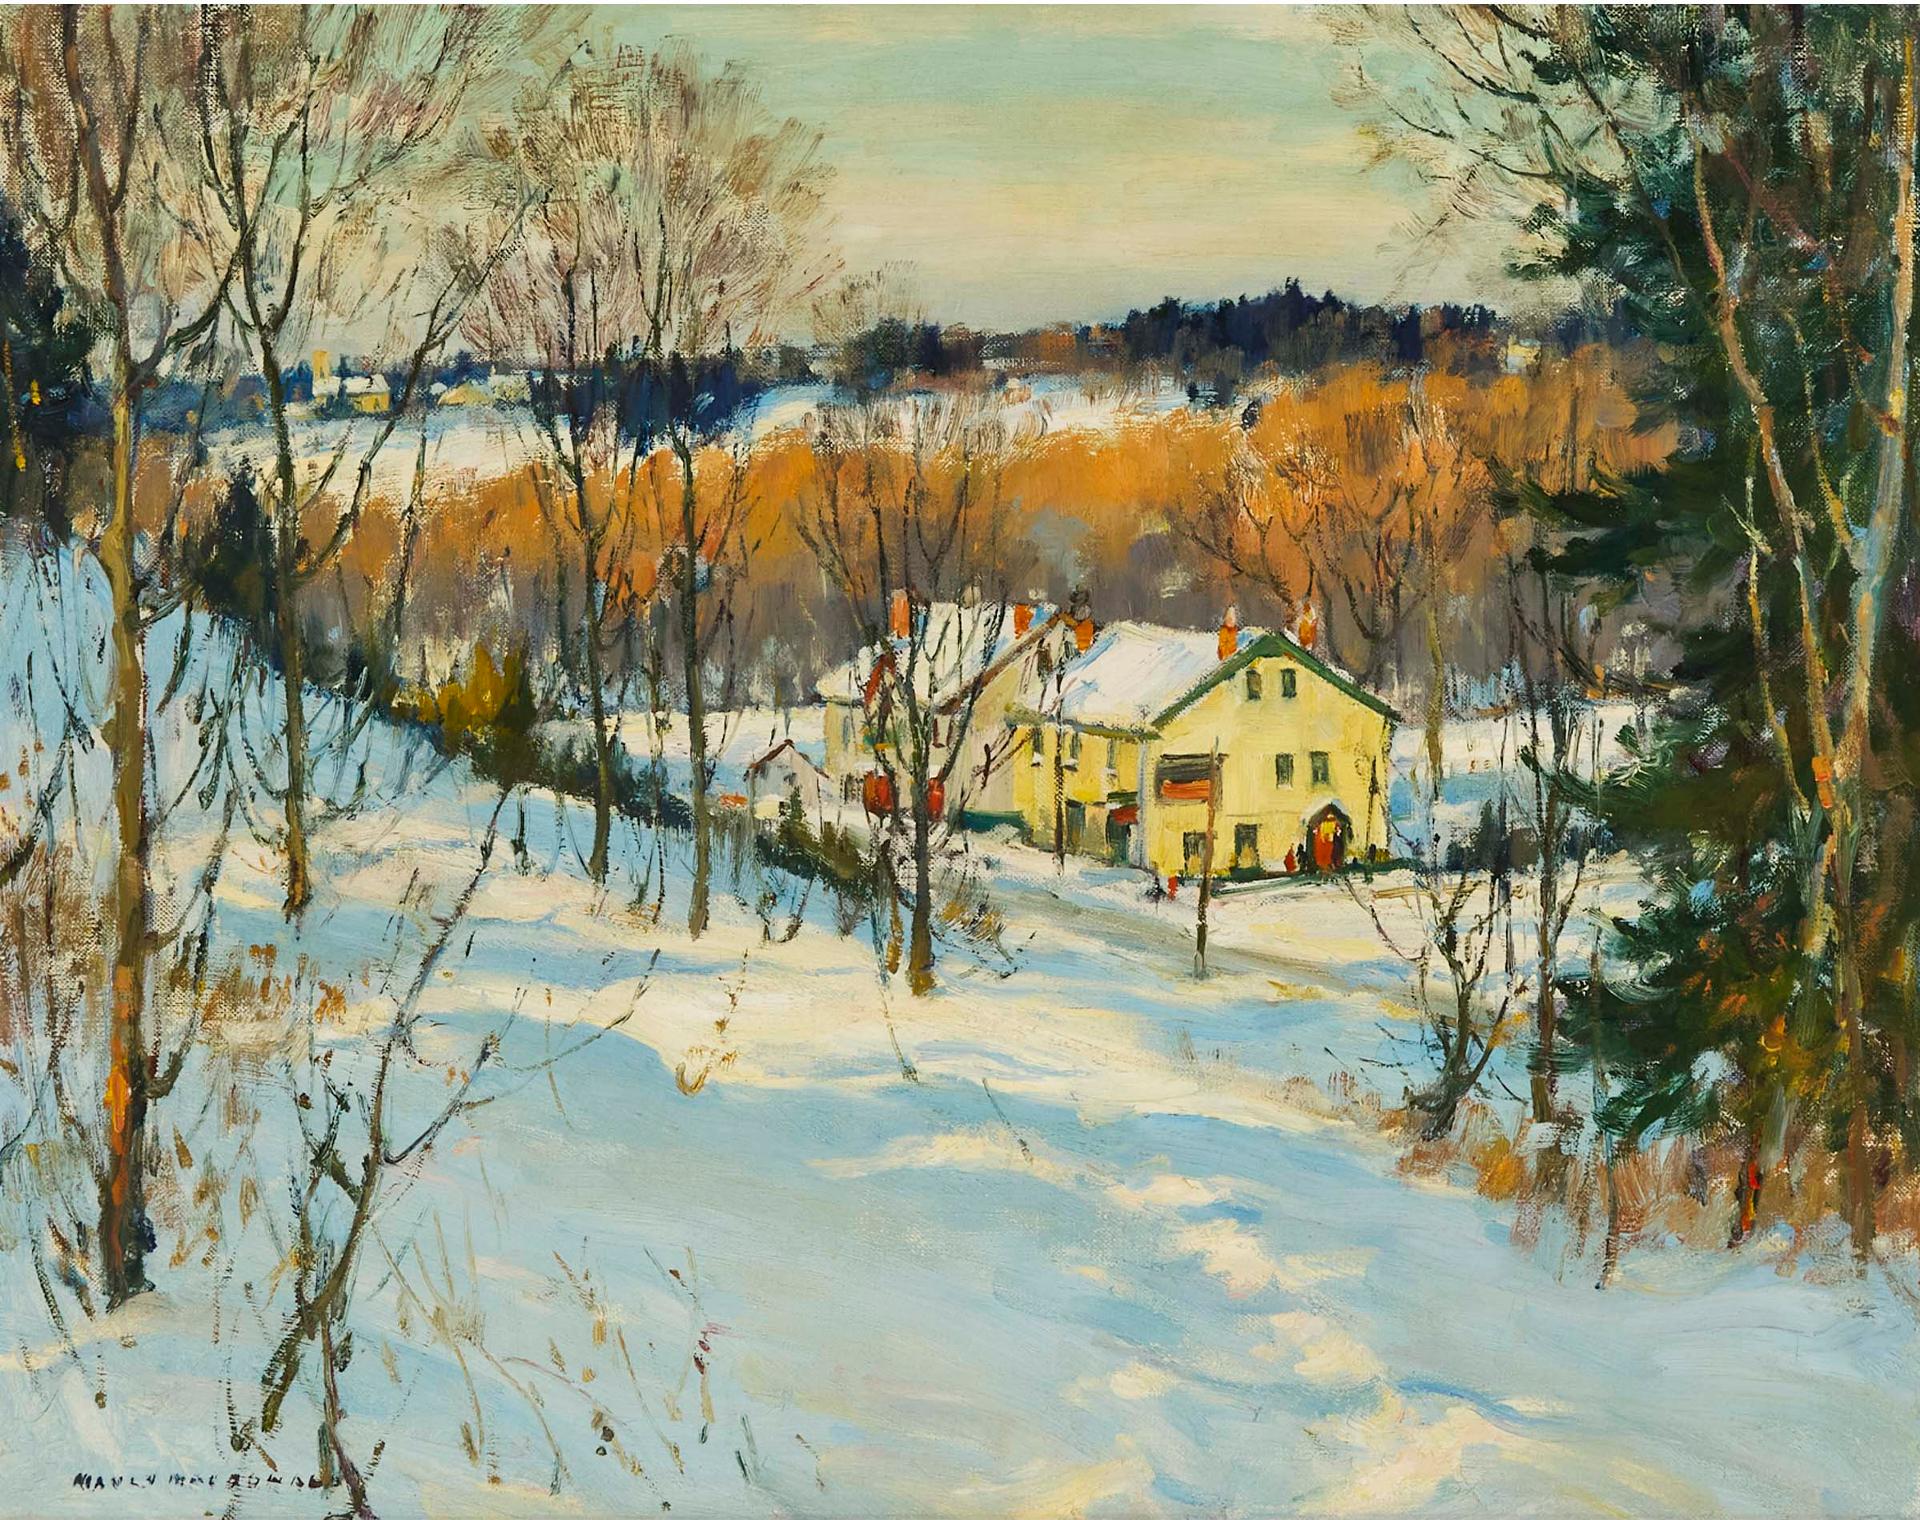 Manly Edward MacDonald (1889-1971) - Village In The Valley, Winter